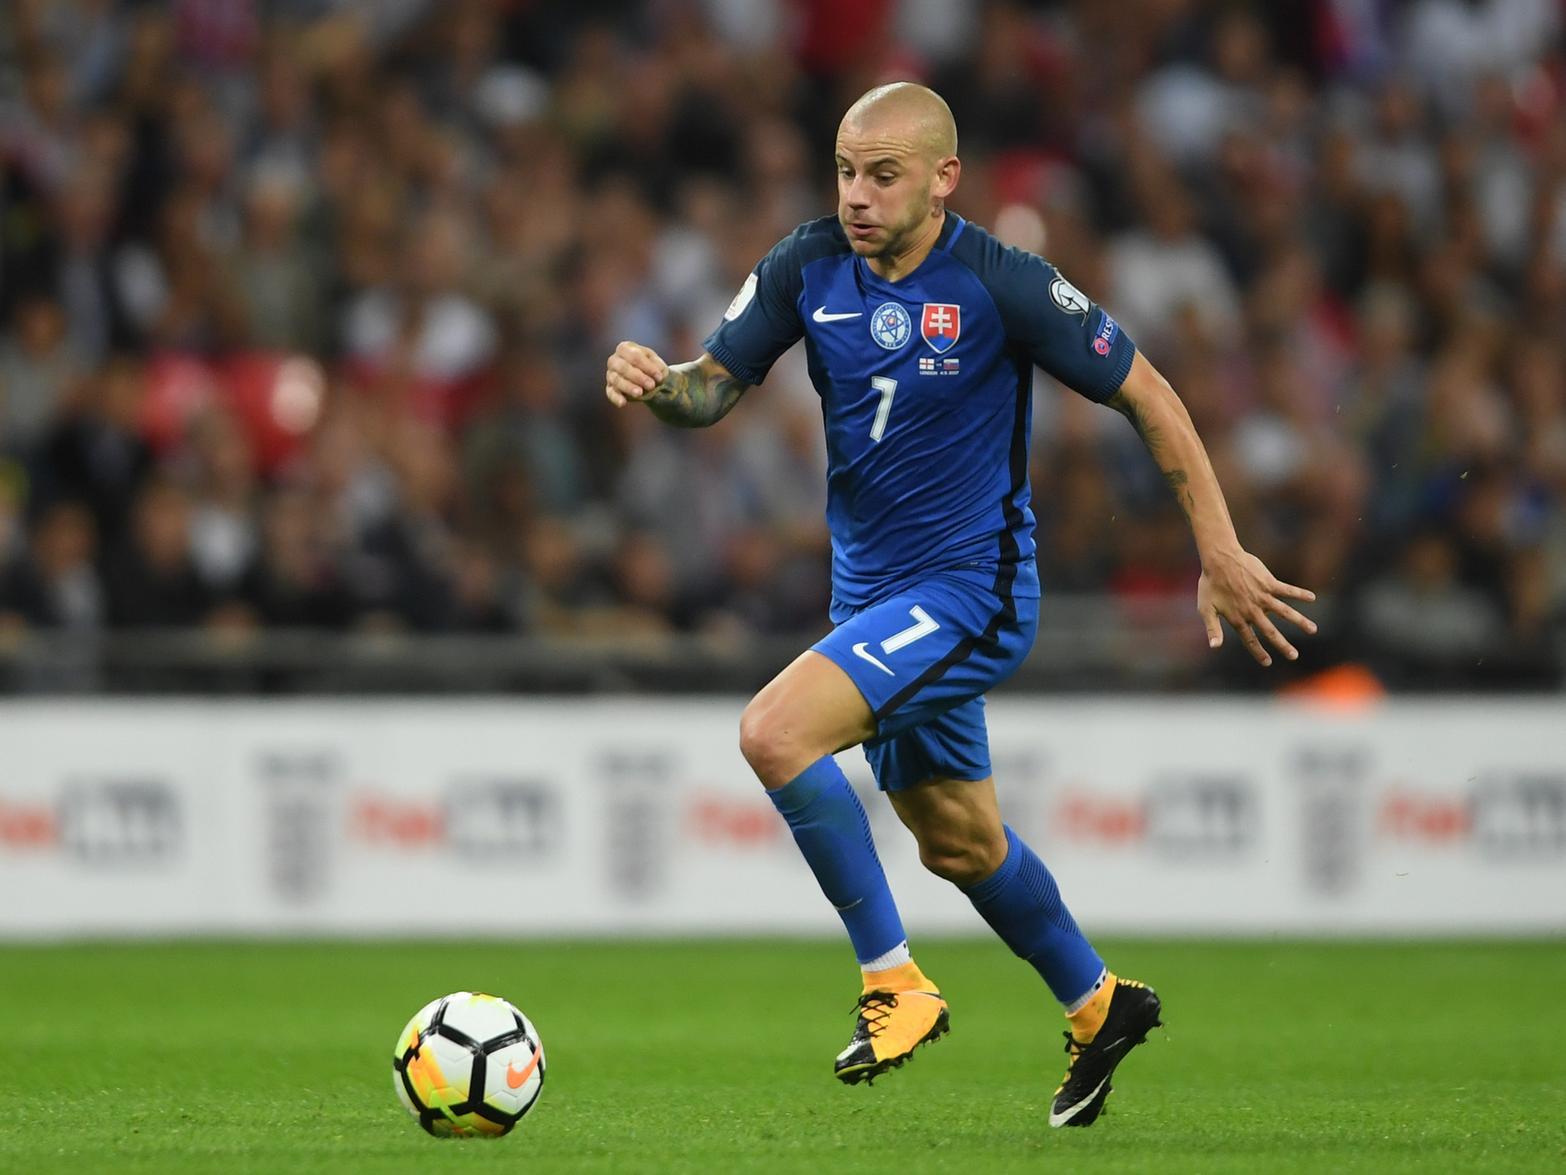 The 30-year-old Slovakia international winger has experience in British football with previous stints at Bolton Wanderers Manchester City and Rangers.